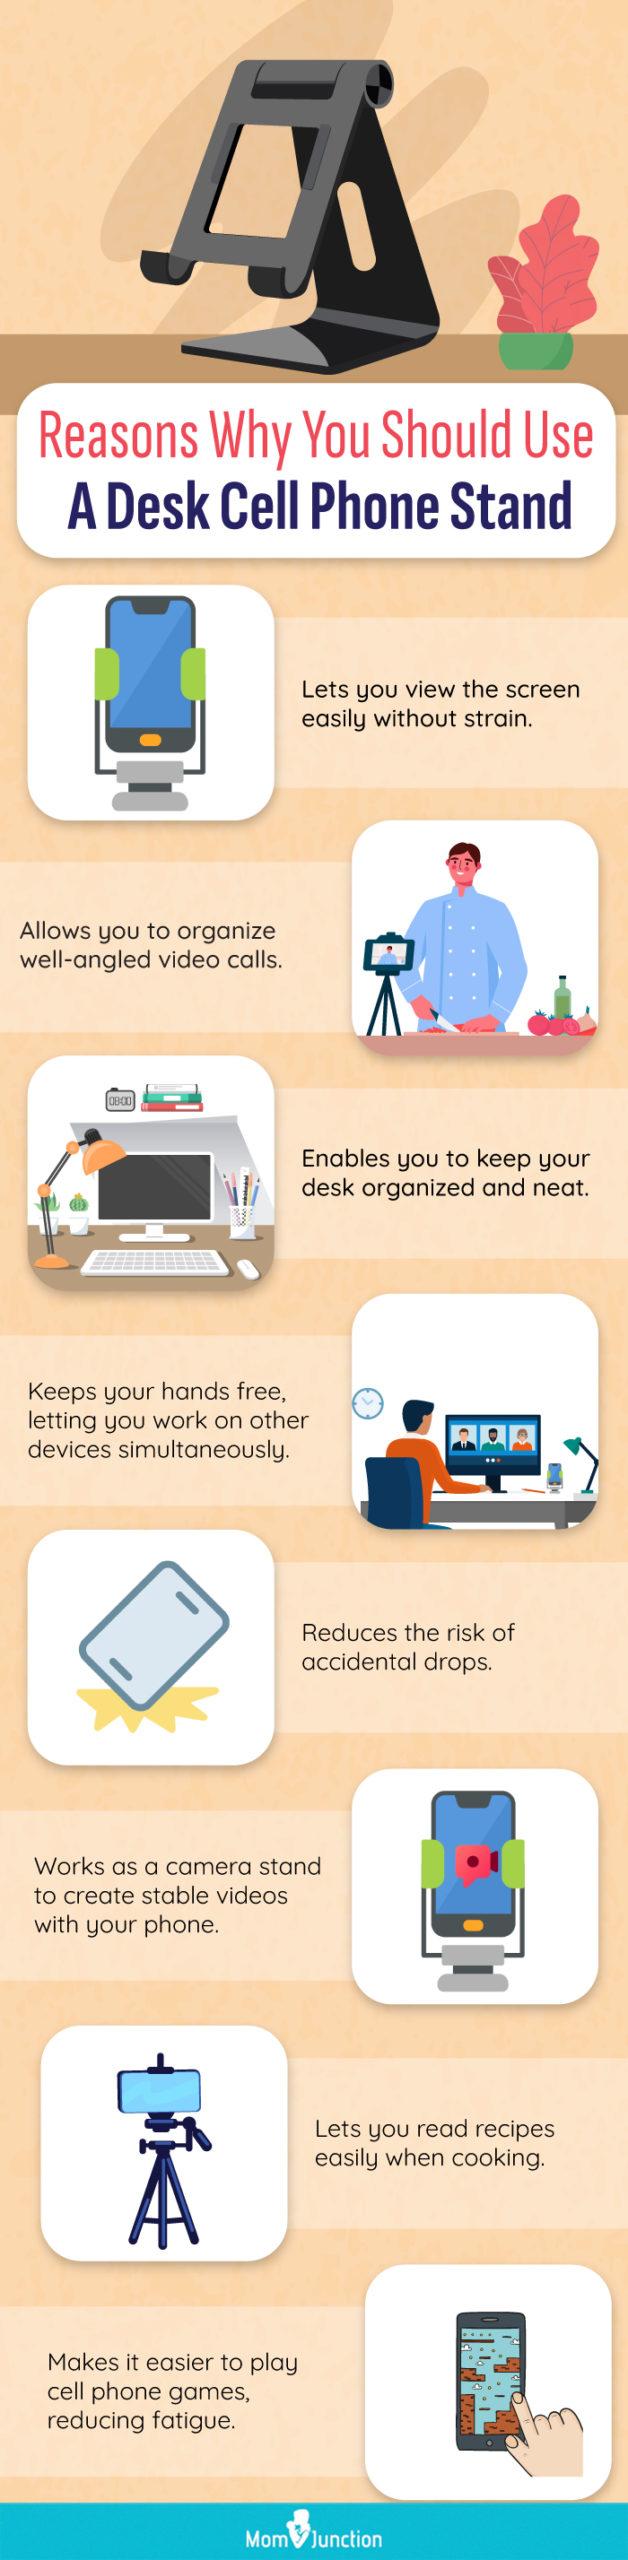 Reasons Why You Should Use A Desk Cell Phone (infographic)